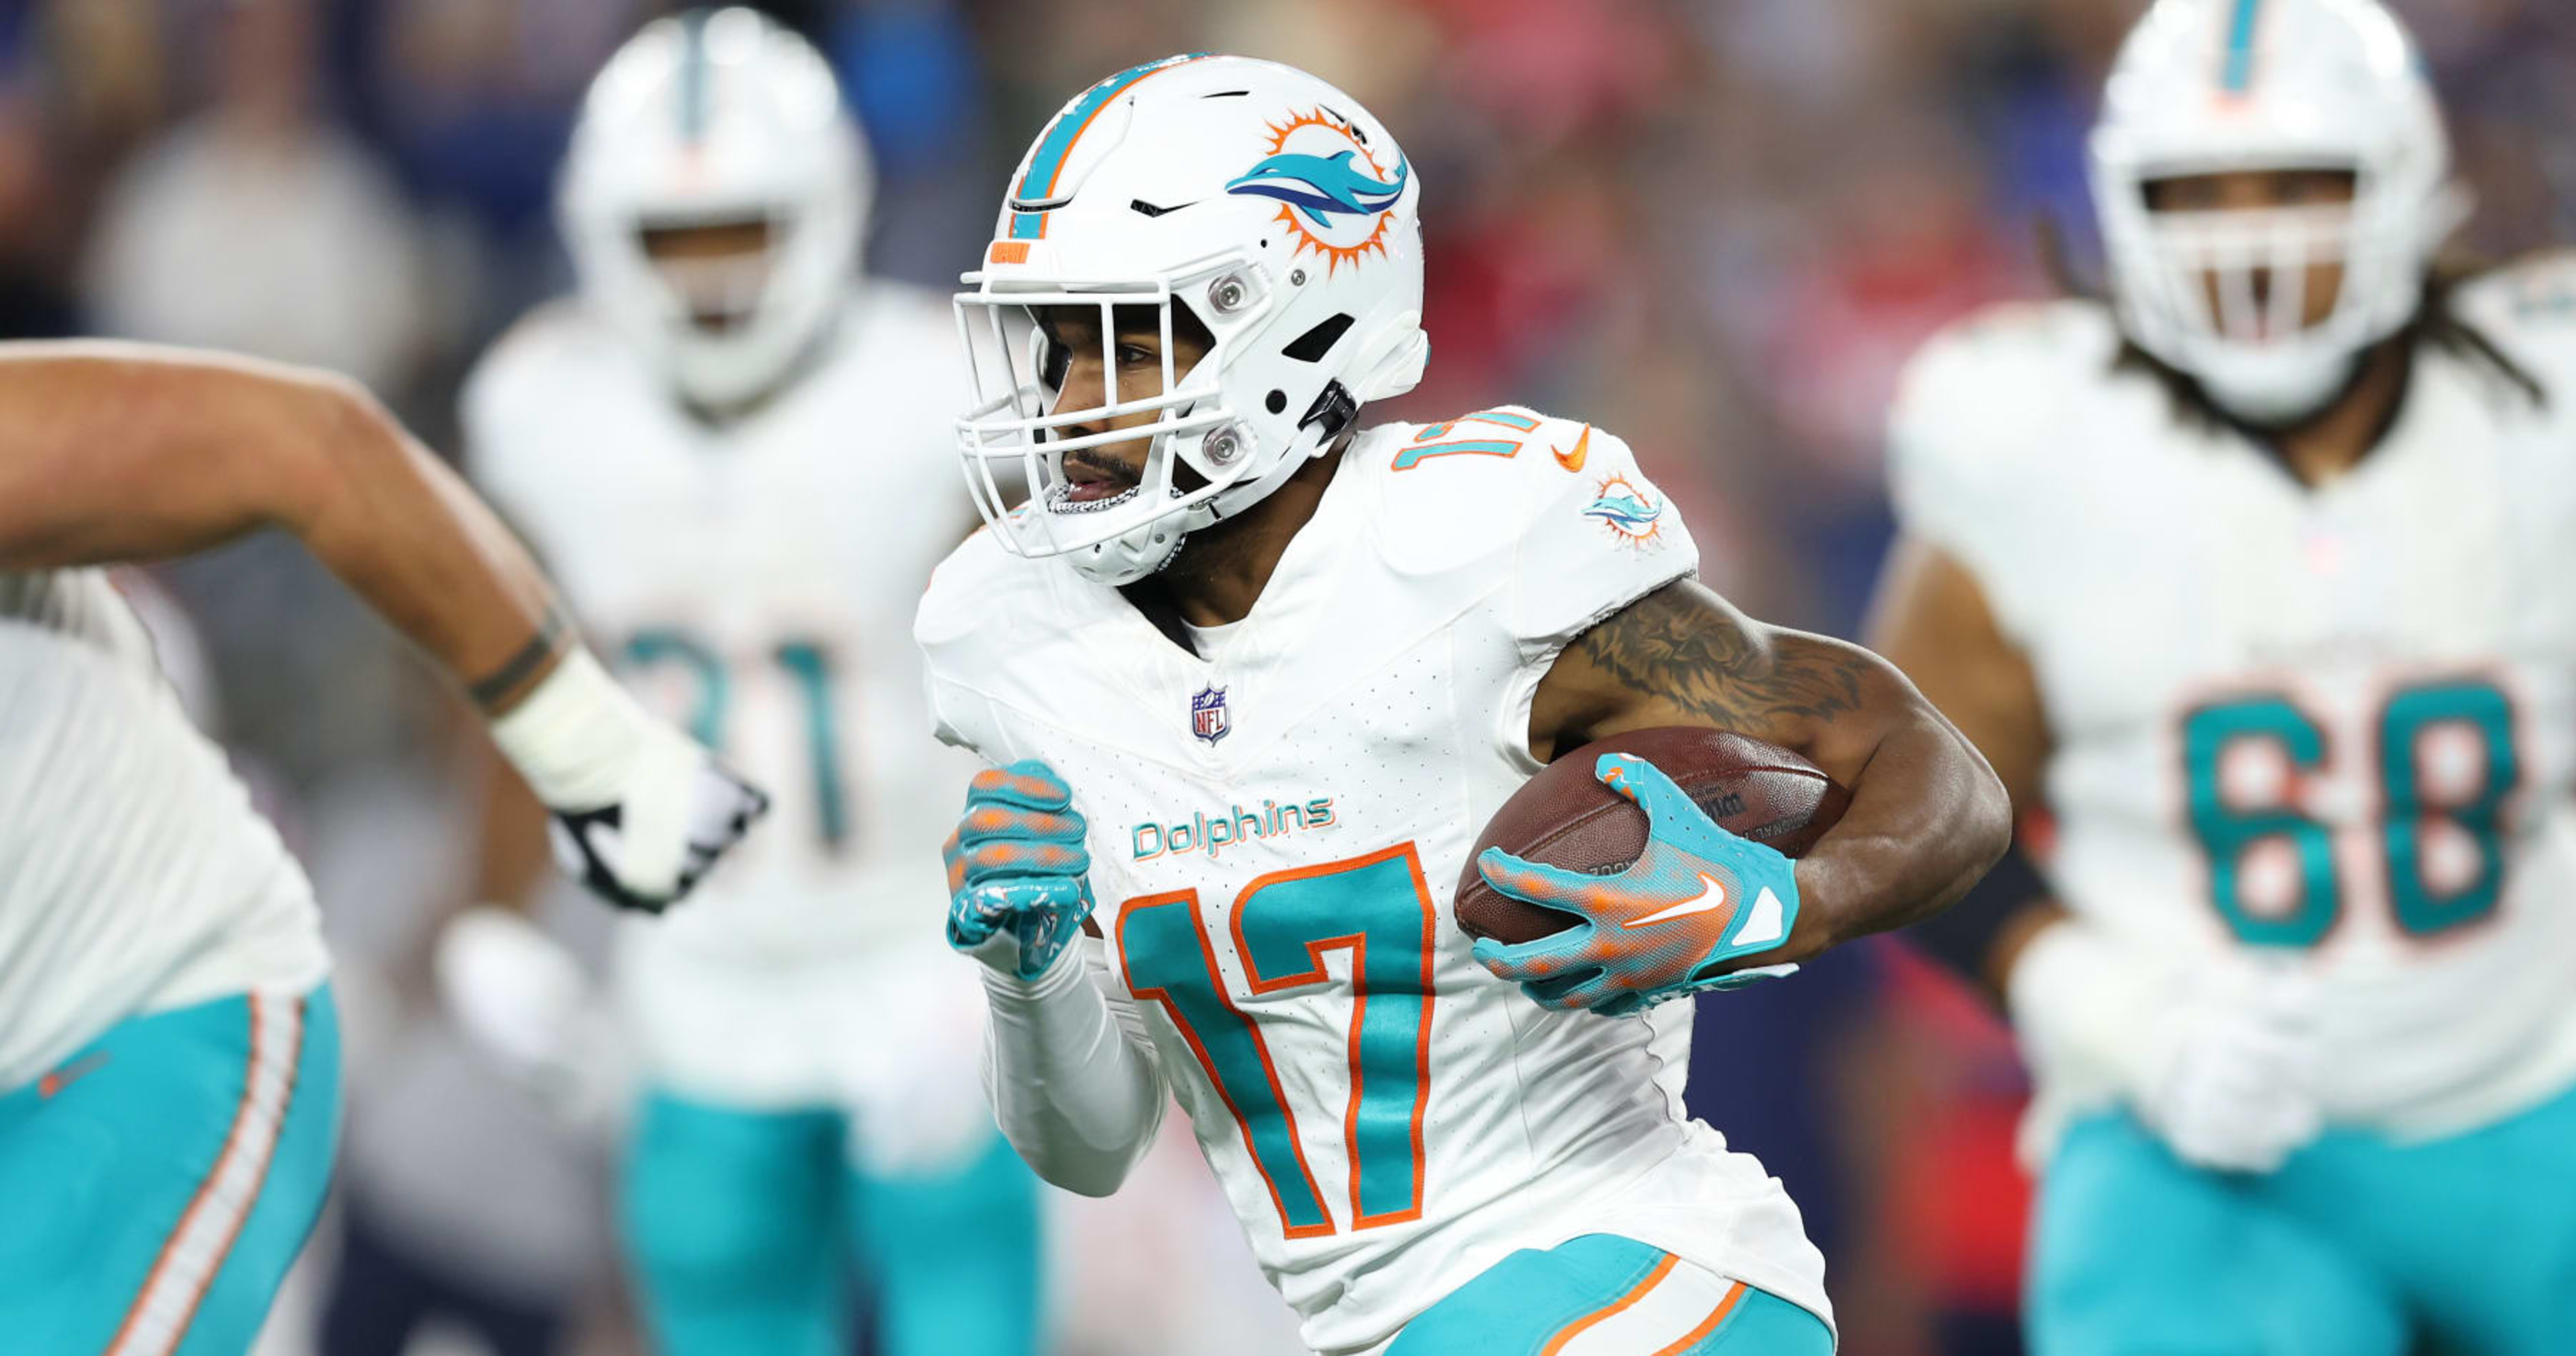 Dolphins receiver Jaylen Waddle ruled out of Sunday's game vs Broncos with  a concussion